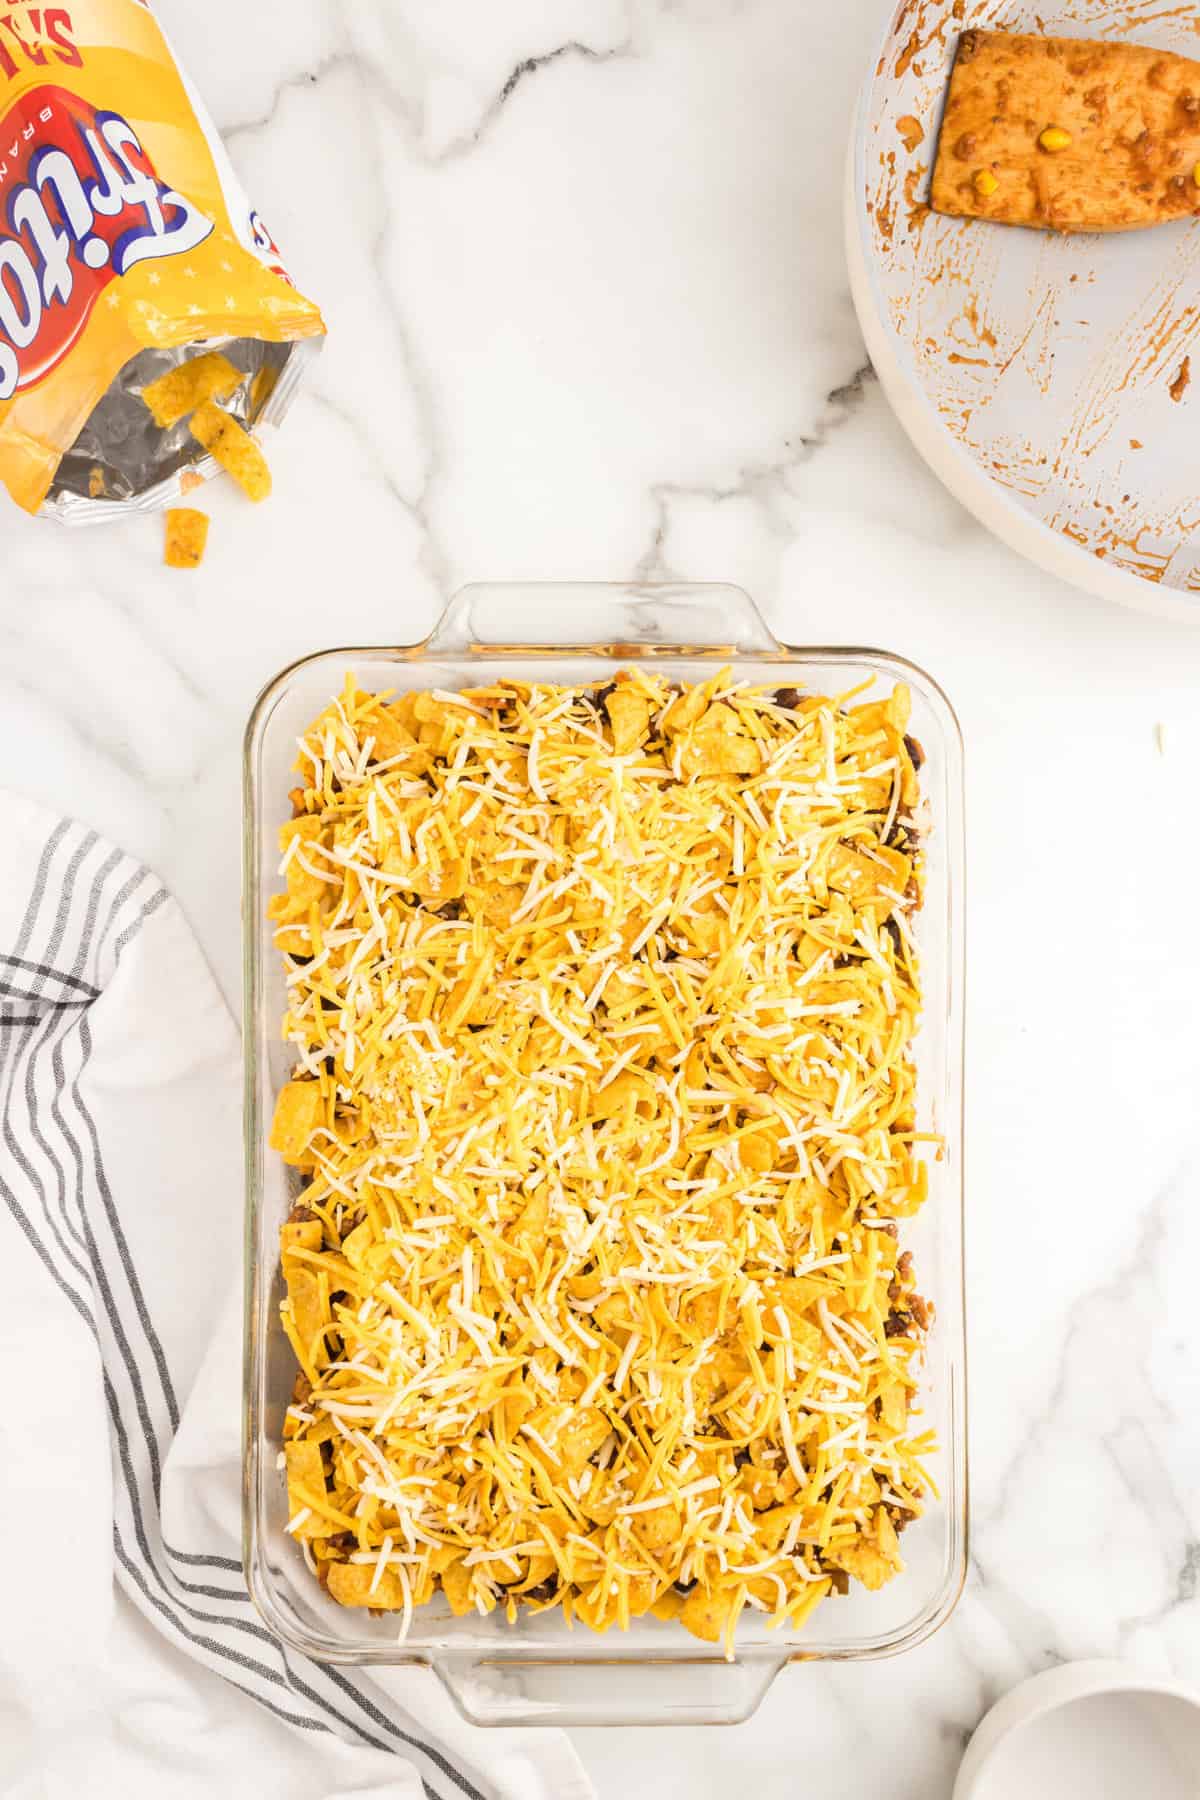 Adding a final layer of shredded cheese to the Frito Pie Casserole in a glass baking dish